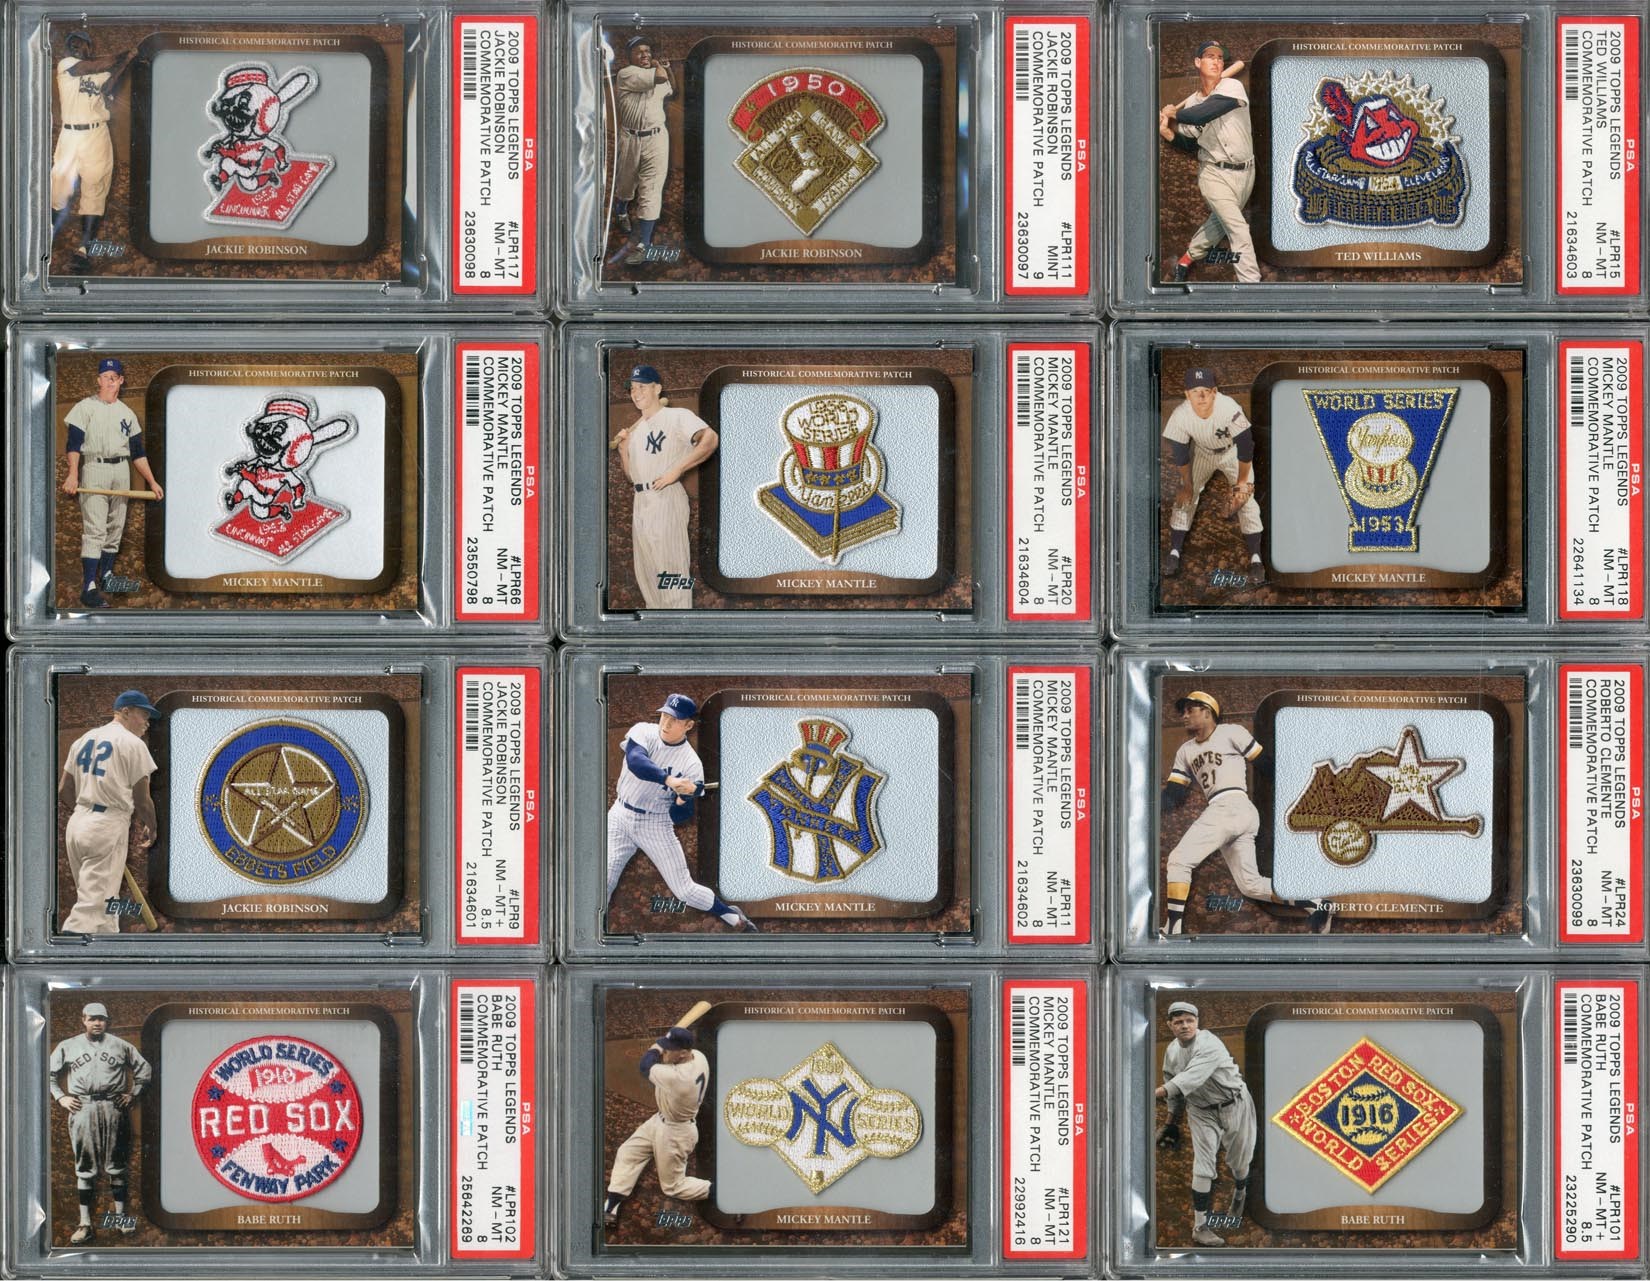 Baseball and Trading Cards - All-Time Greatest 2009 Topps Legends Commemorative Patch PSA Graded Complete Set - #1 on PSA Registry (125 Pop 1's)